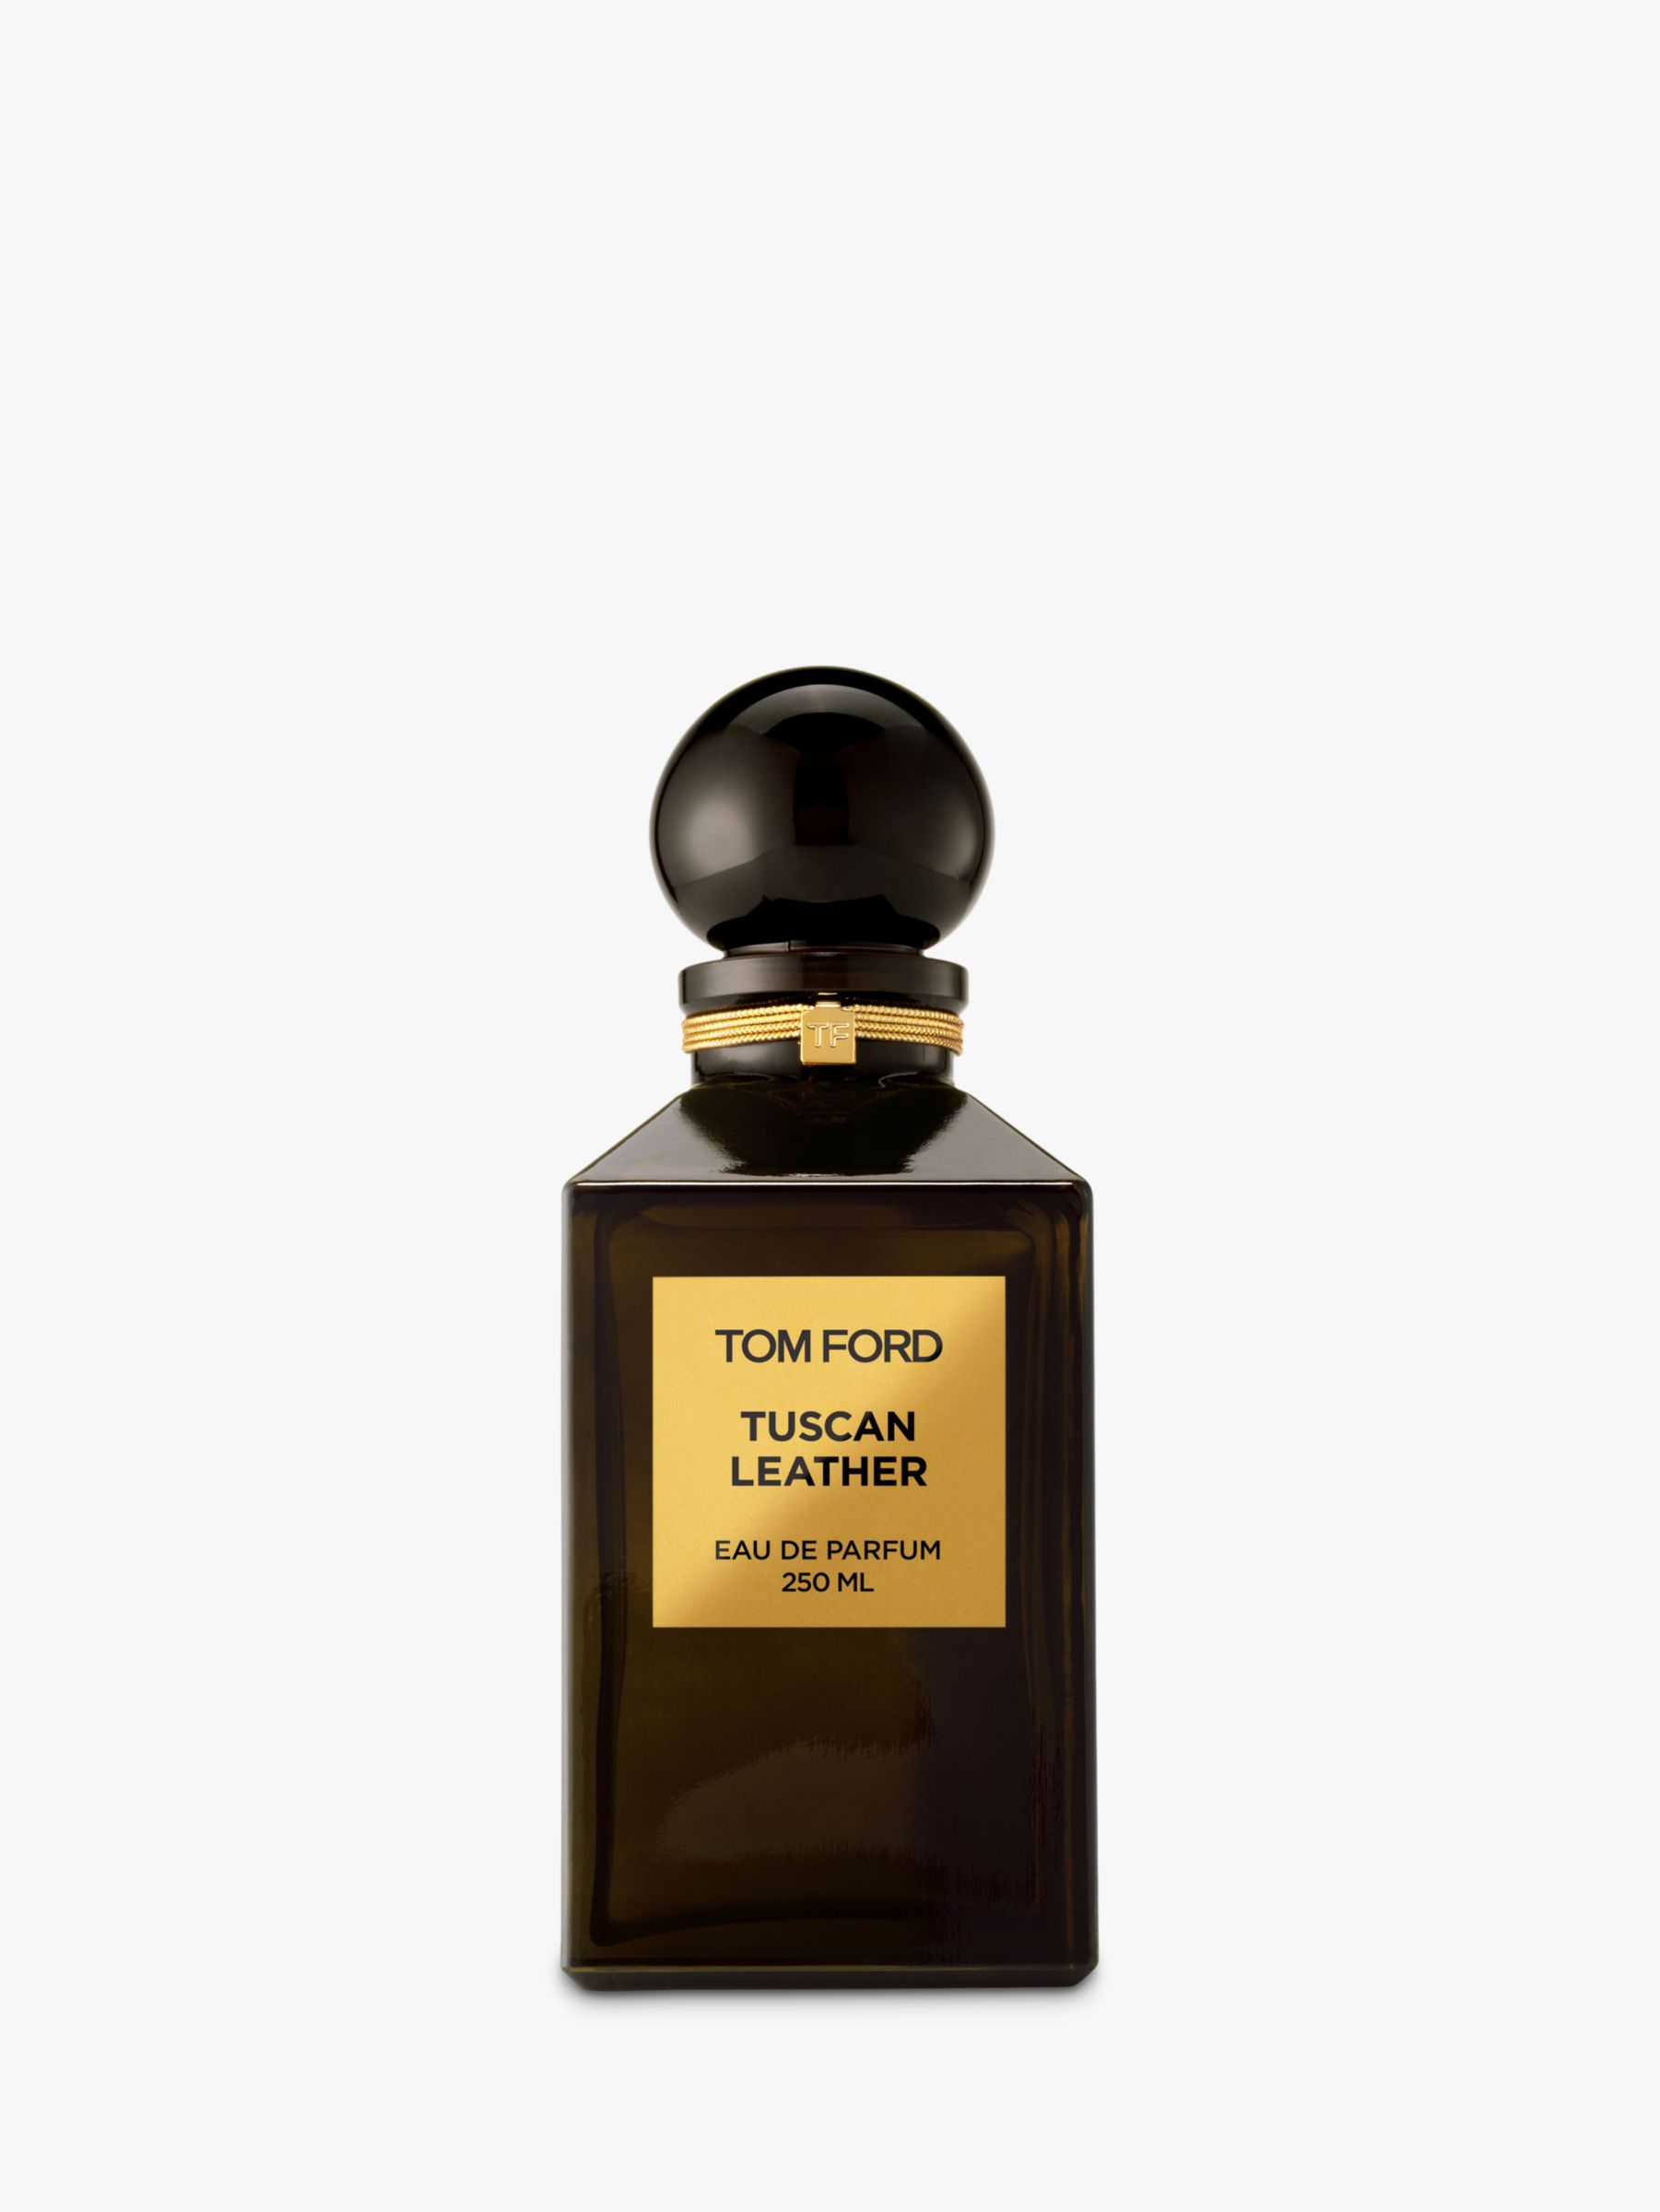 TOM FORD Private Blend Tuscan Leather Eau de at John Lewis & Partners